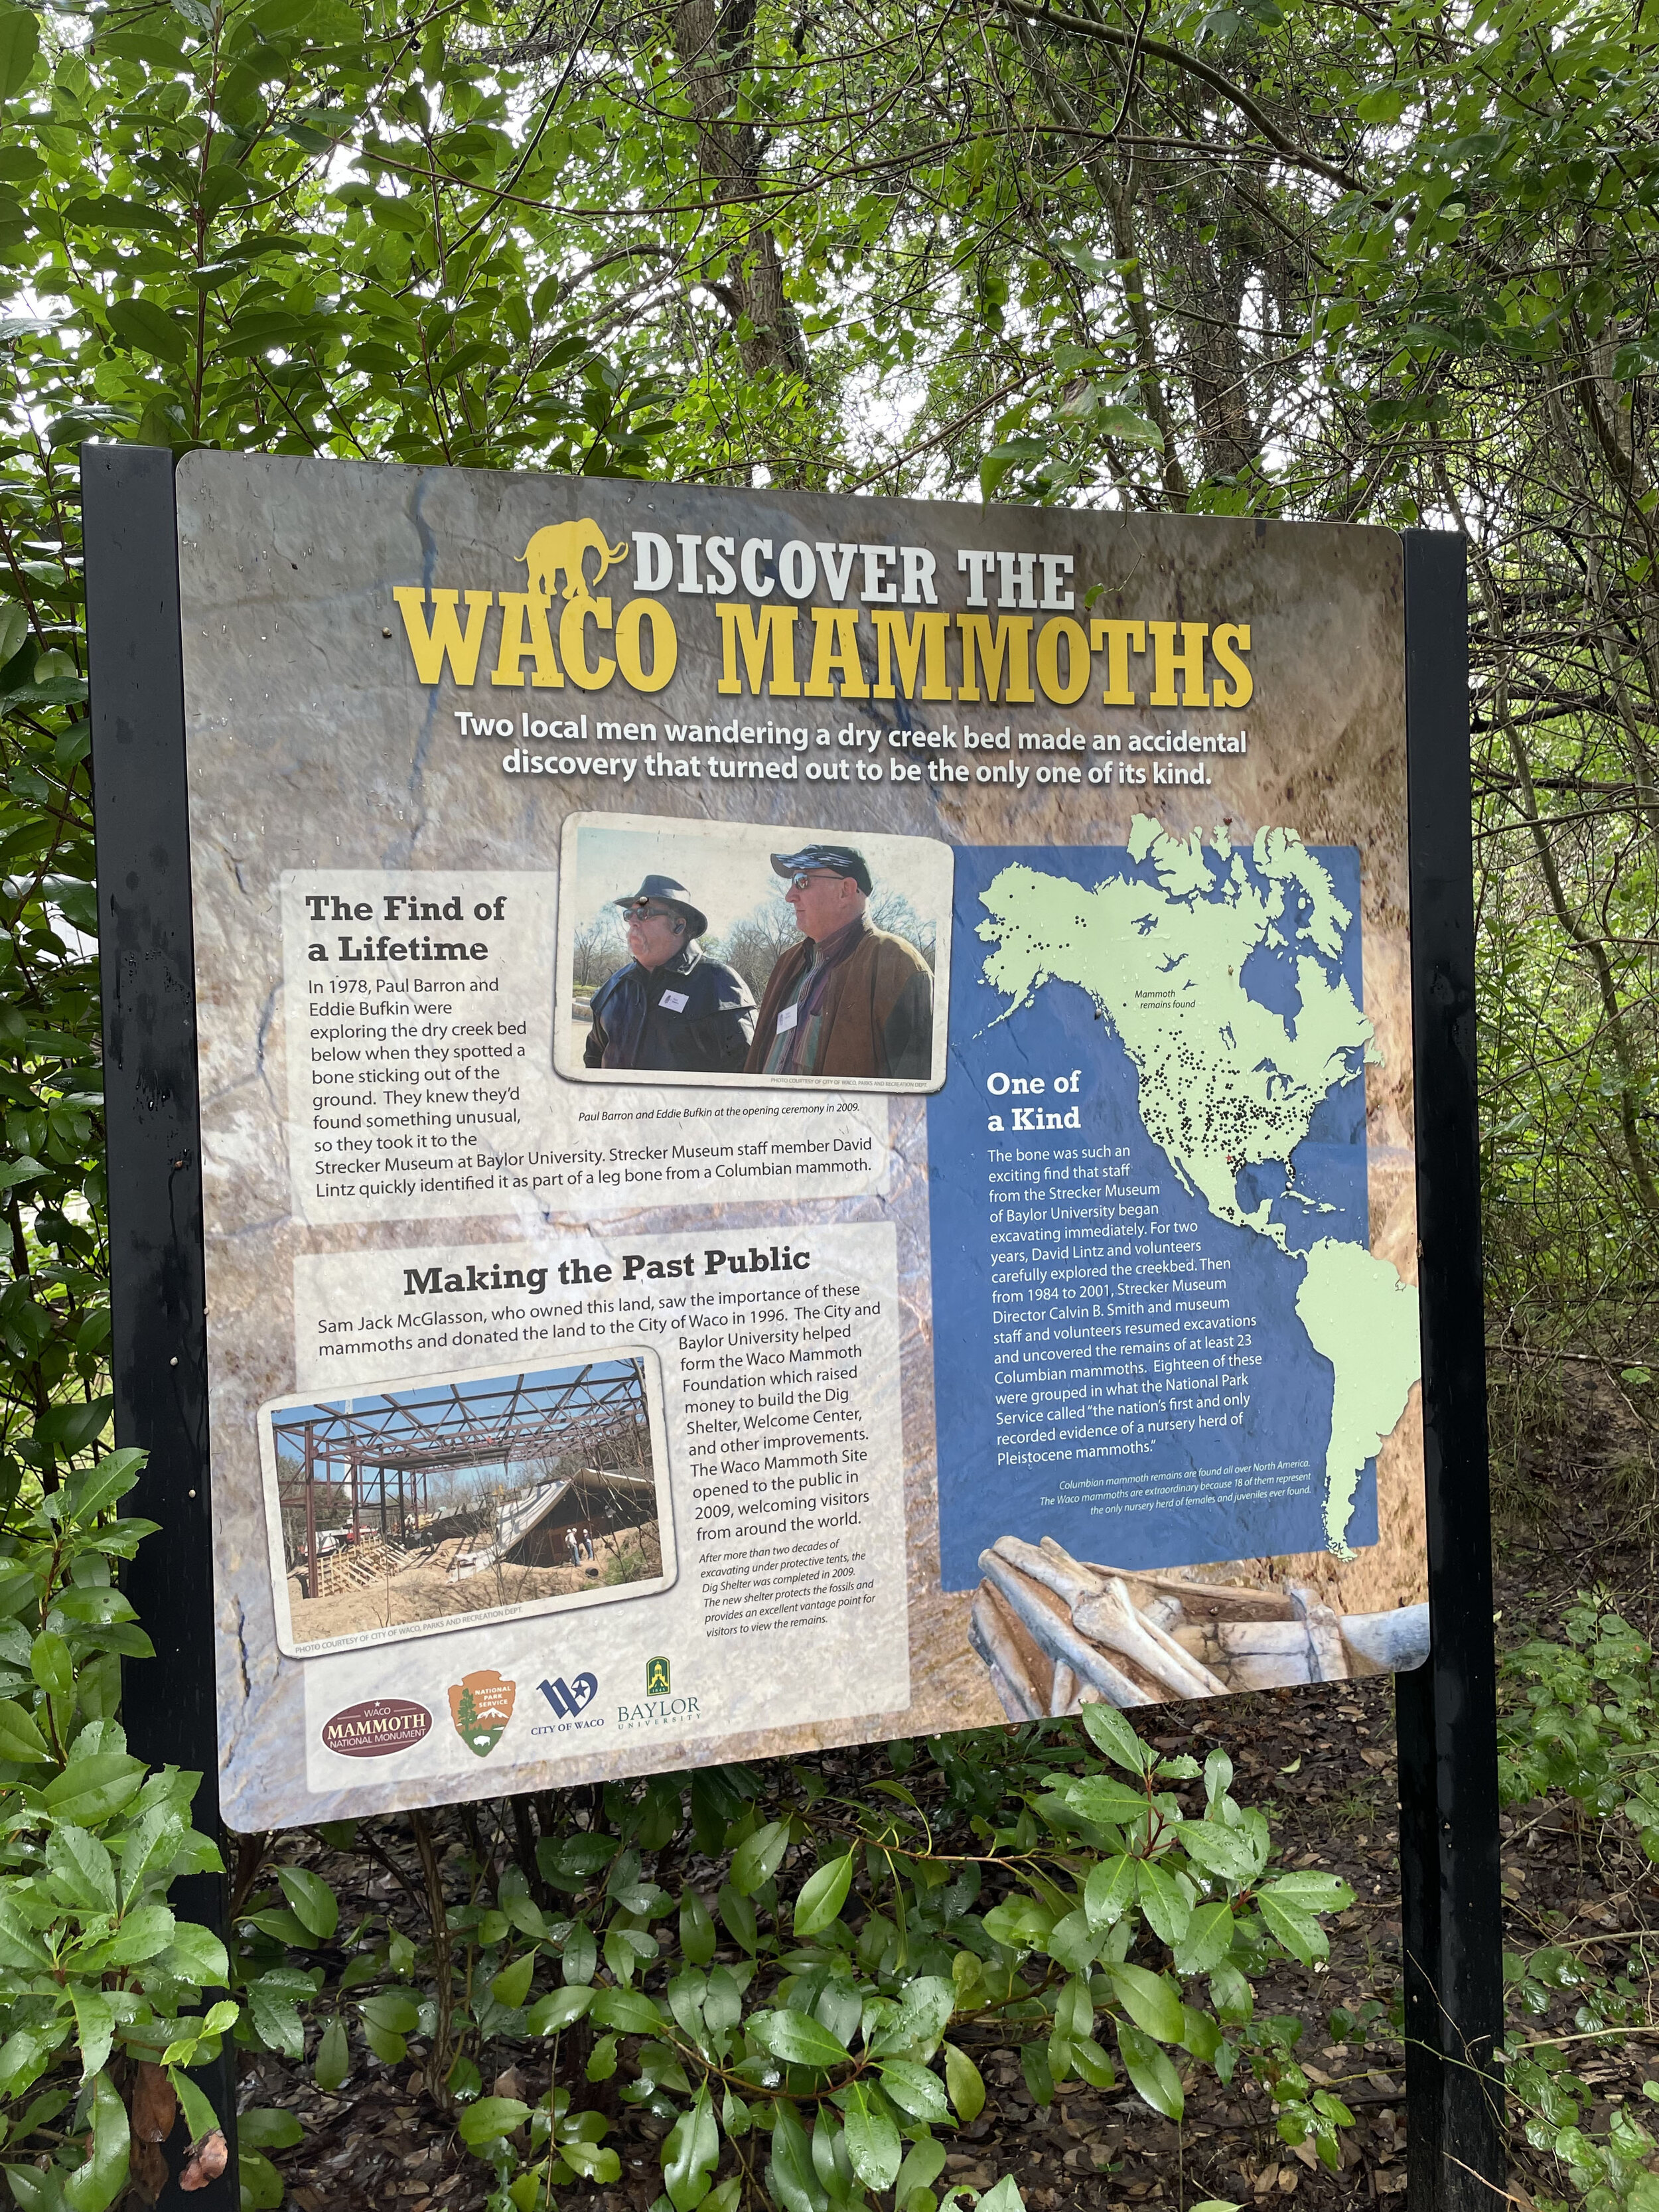 signage at the Waco Mammoth National Monument